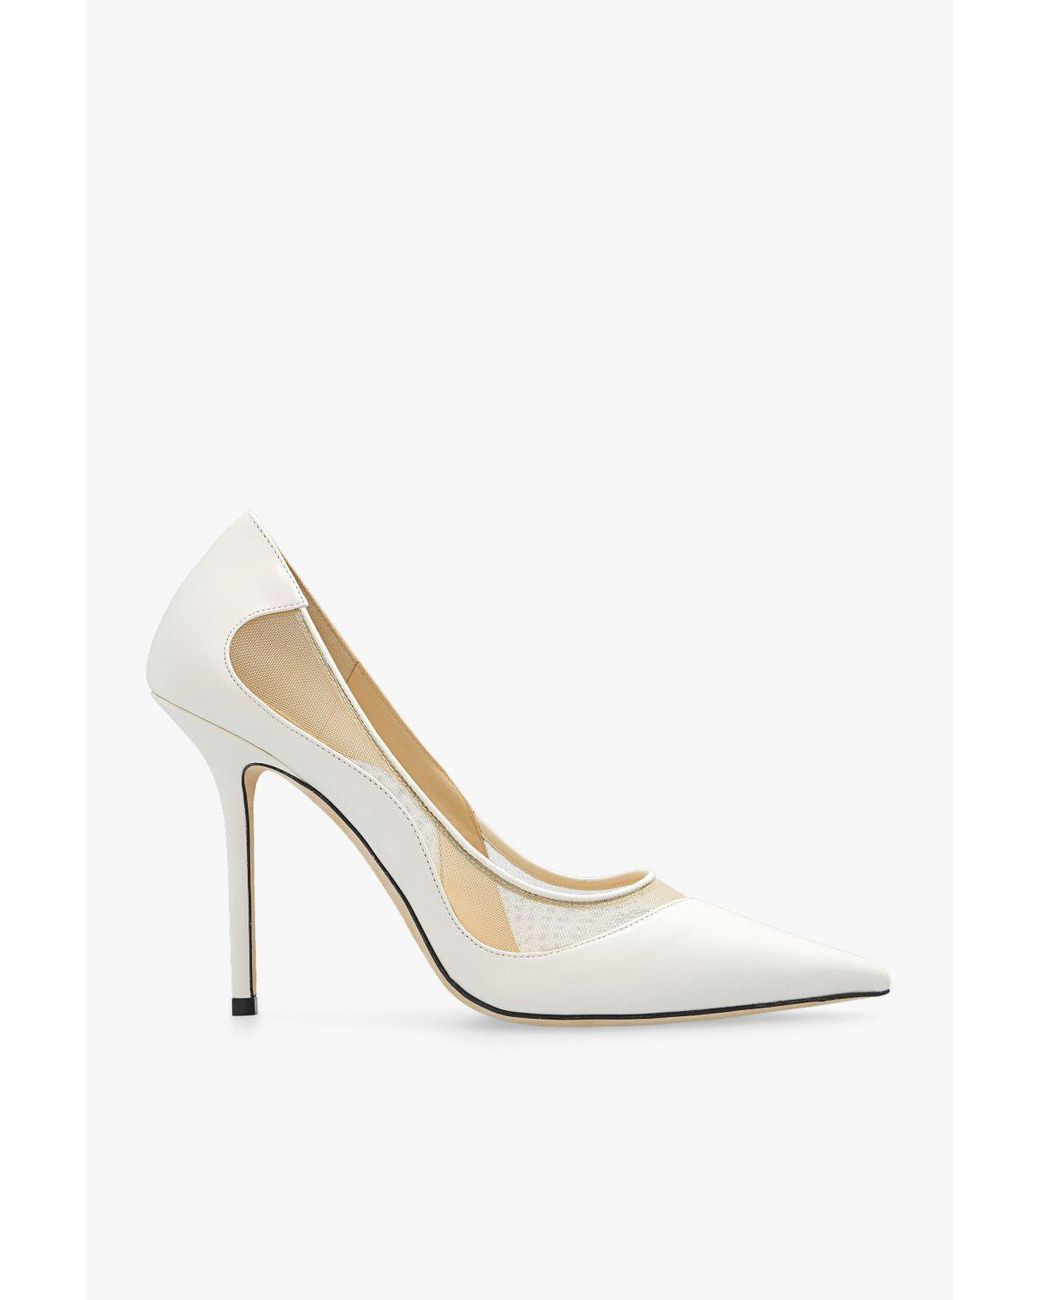 Jimmy Choo 'love' Stiletto Pumps in Natural | Lyst